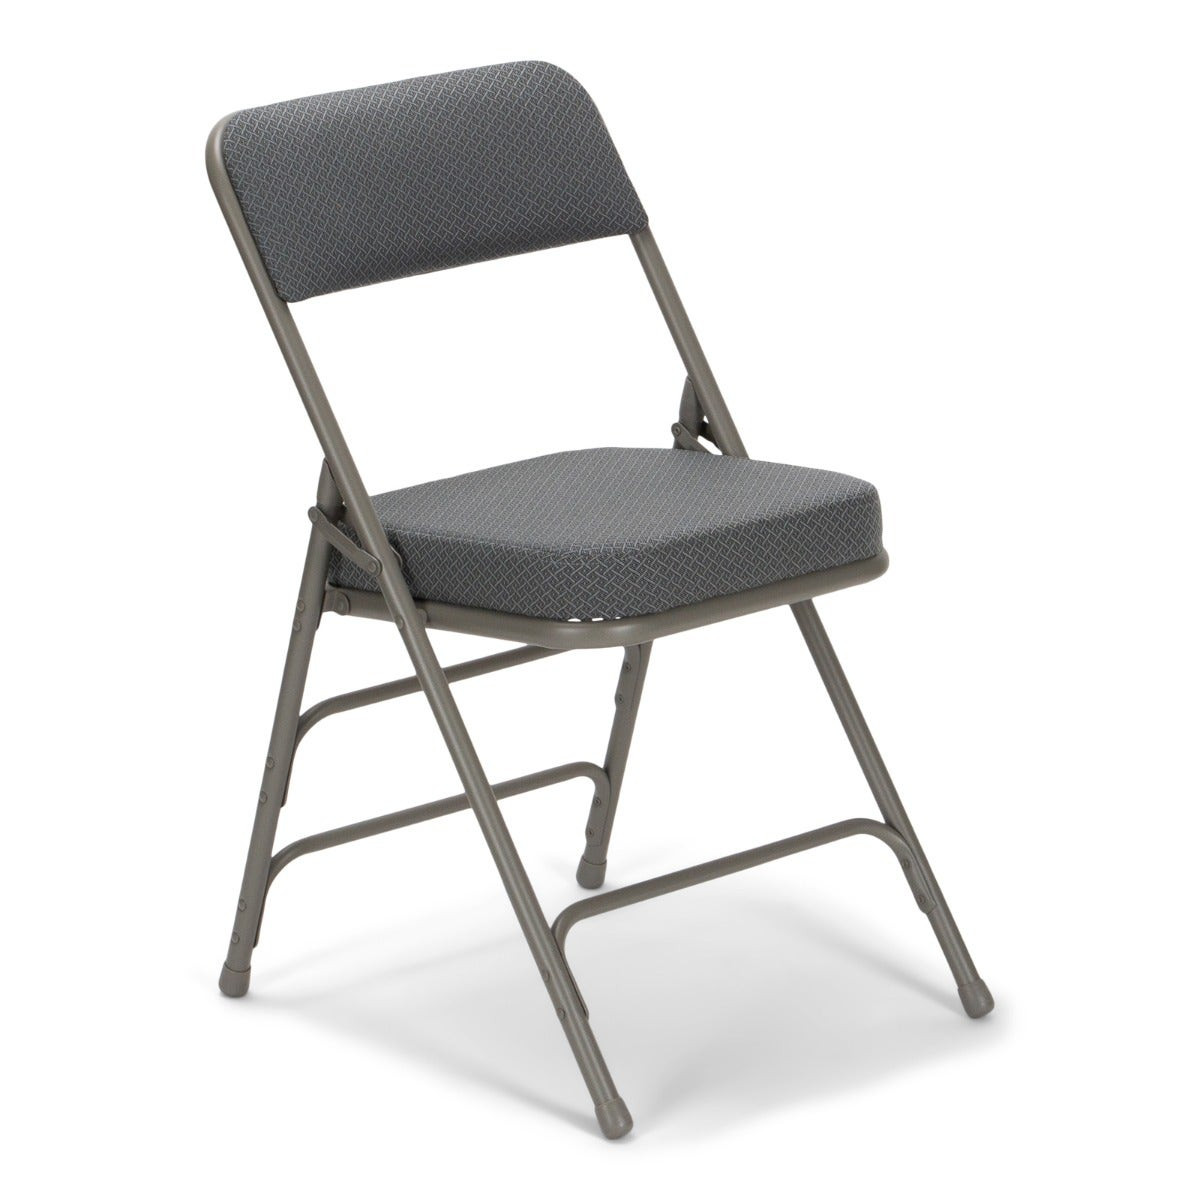 https://cdn1.bigcommerce.com/server600/eqcqd/products/22139/images/333890/fabric-padded-metal-folding-chair-2-inch-cushion-gray-8__63987.1701536481.1280.1280.jpg?c=2